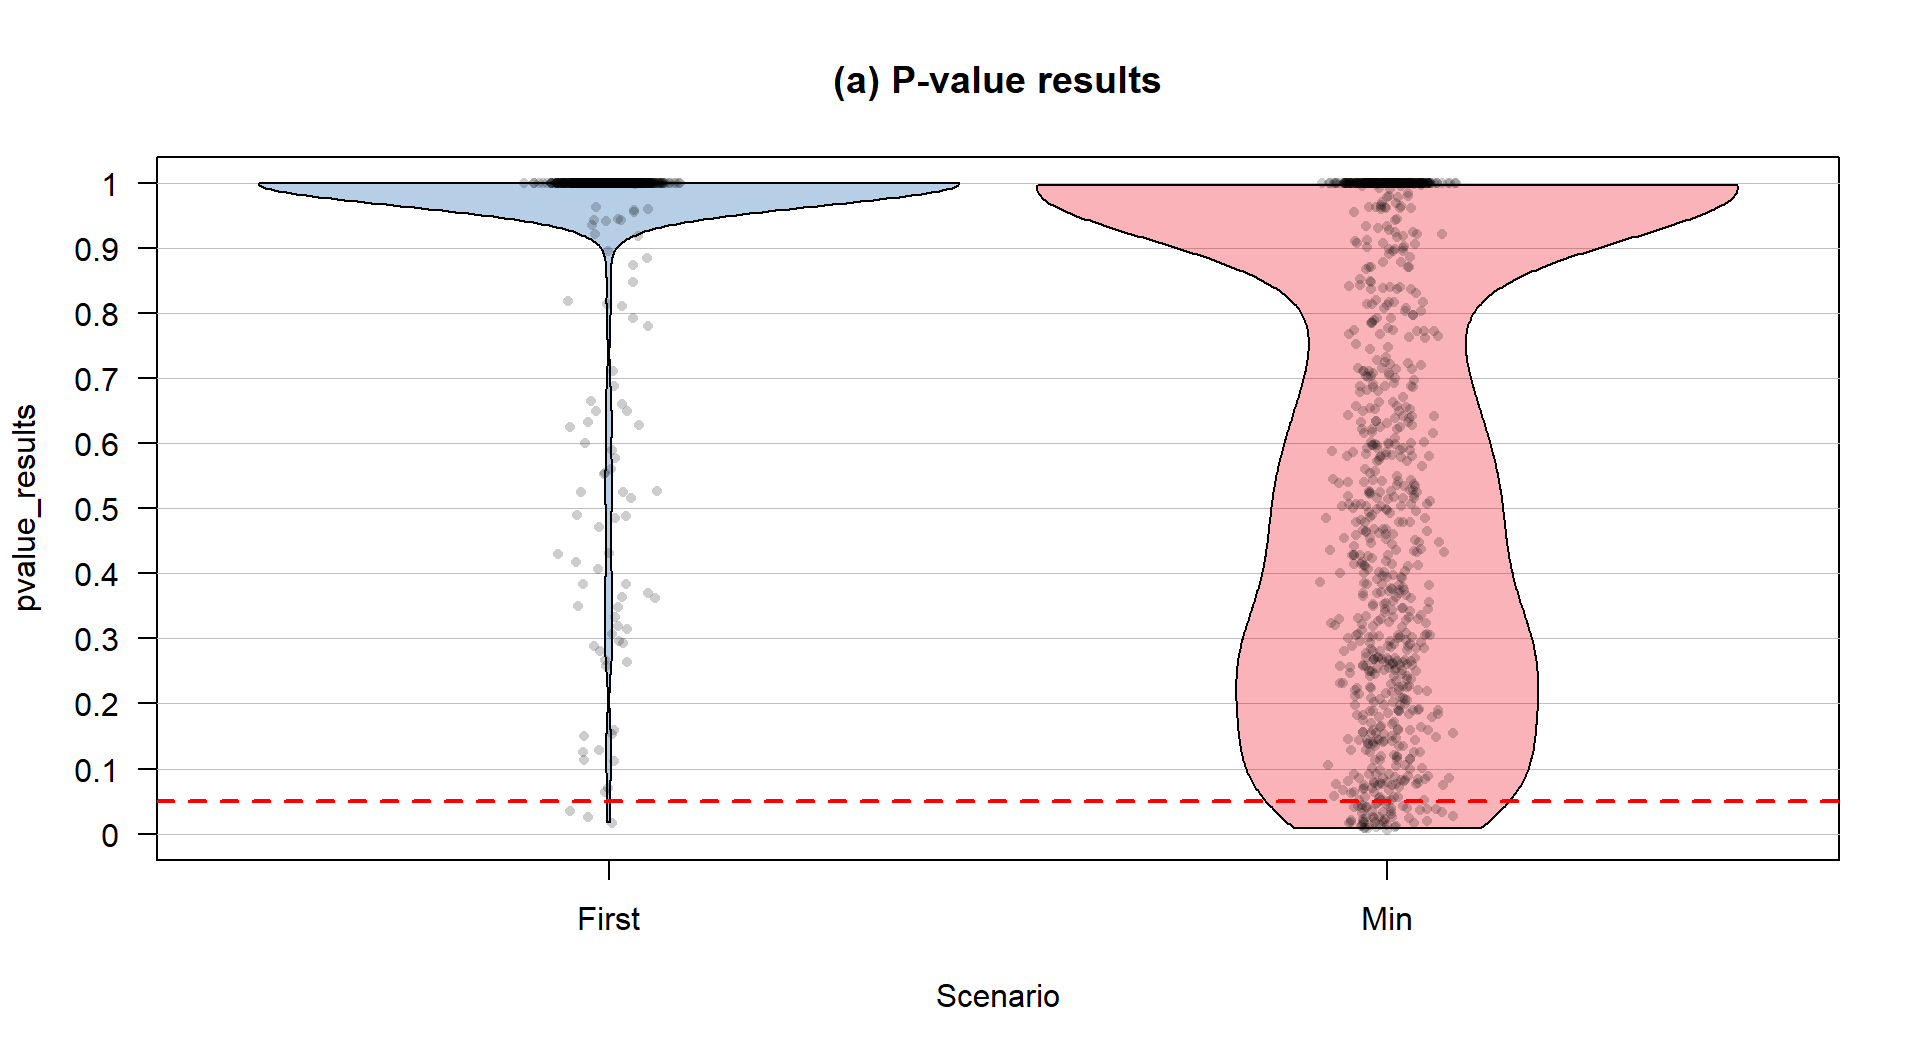 Pirate-plot of a simulation study results of p-values with Bonferroni correction.